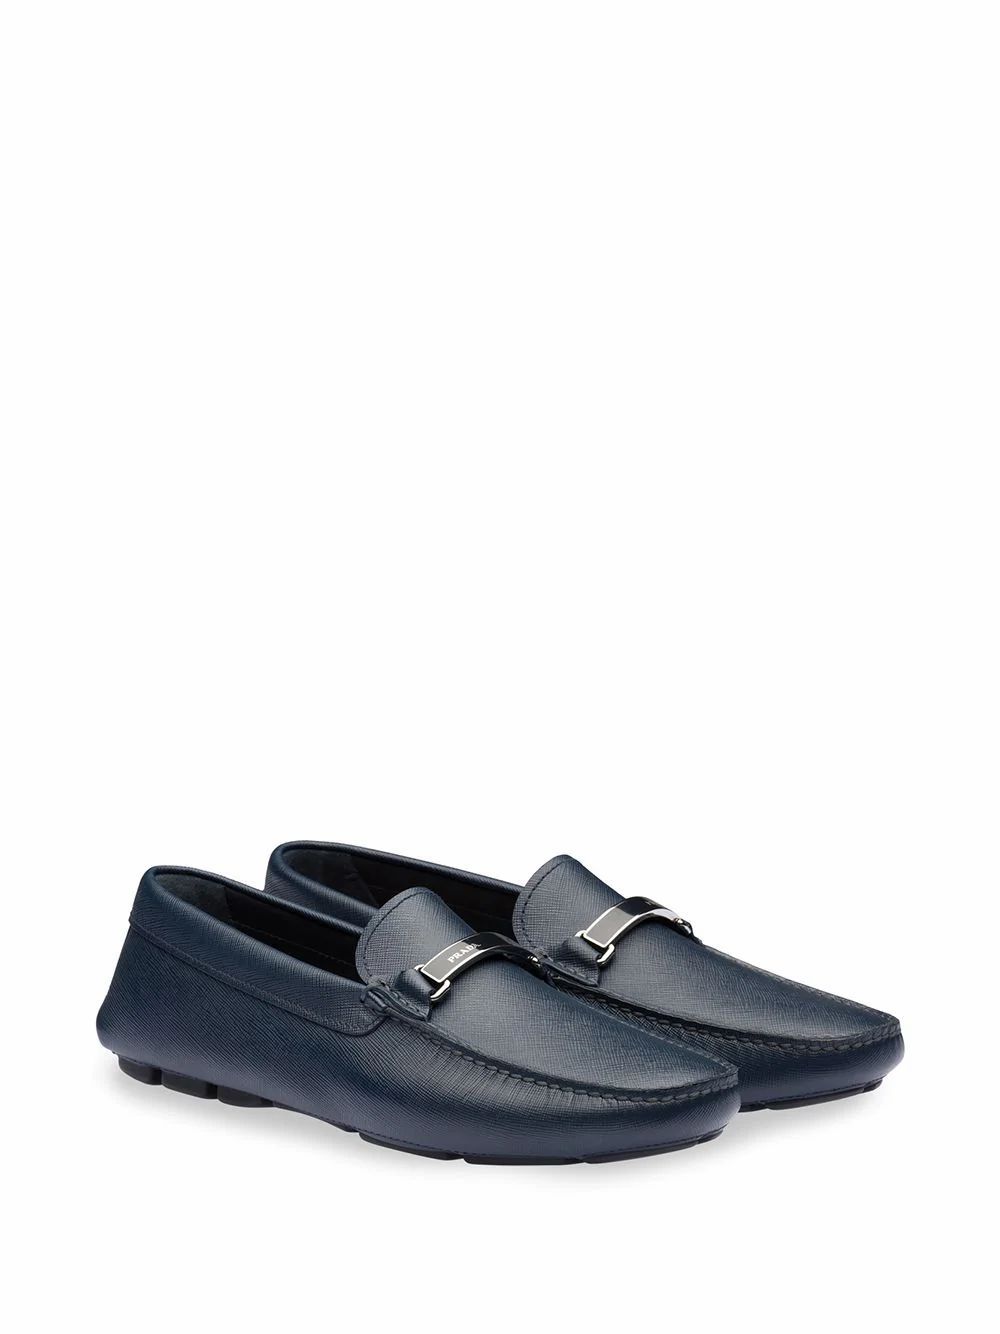 LOAFERS PRADA, LEATHER 100%, color BLUE, Rubber sole, SS21, product code 2DD159FU00I053F0216